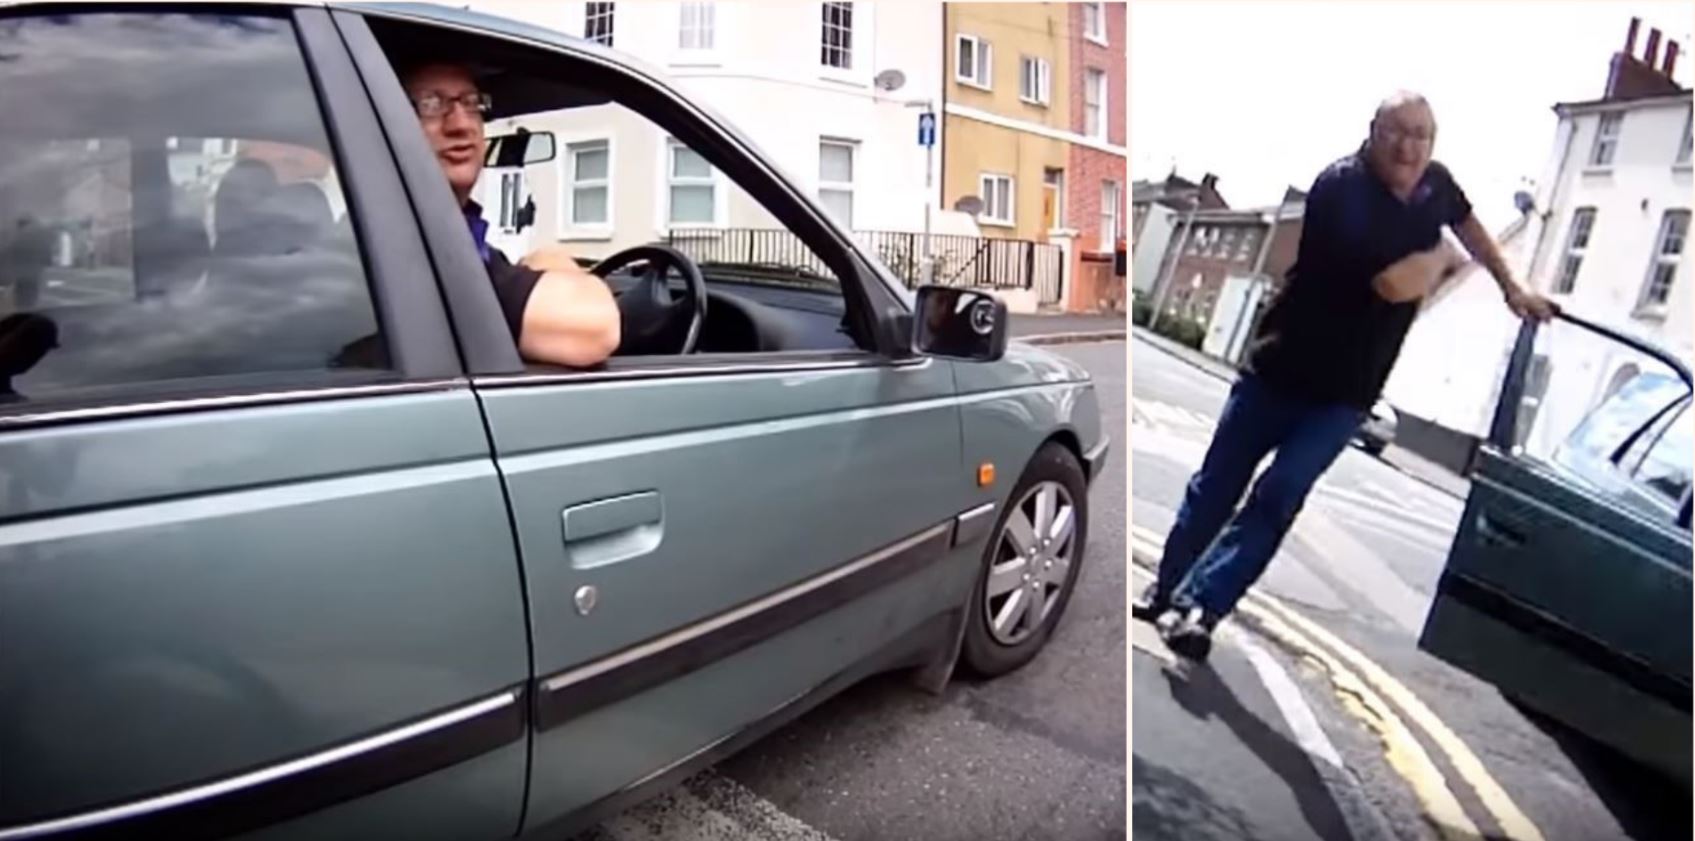 F*cken angry cyclist vs f*cken angry driver ends brilliantly